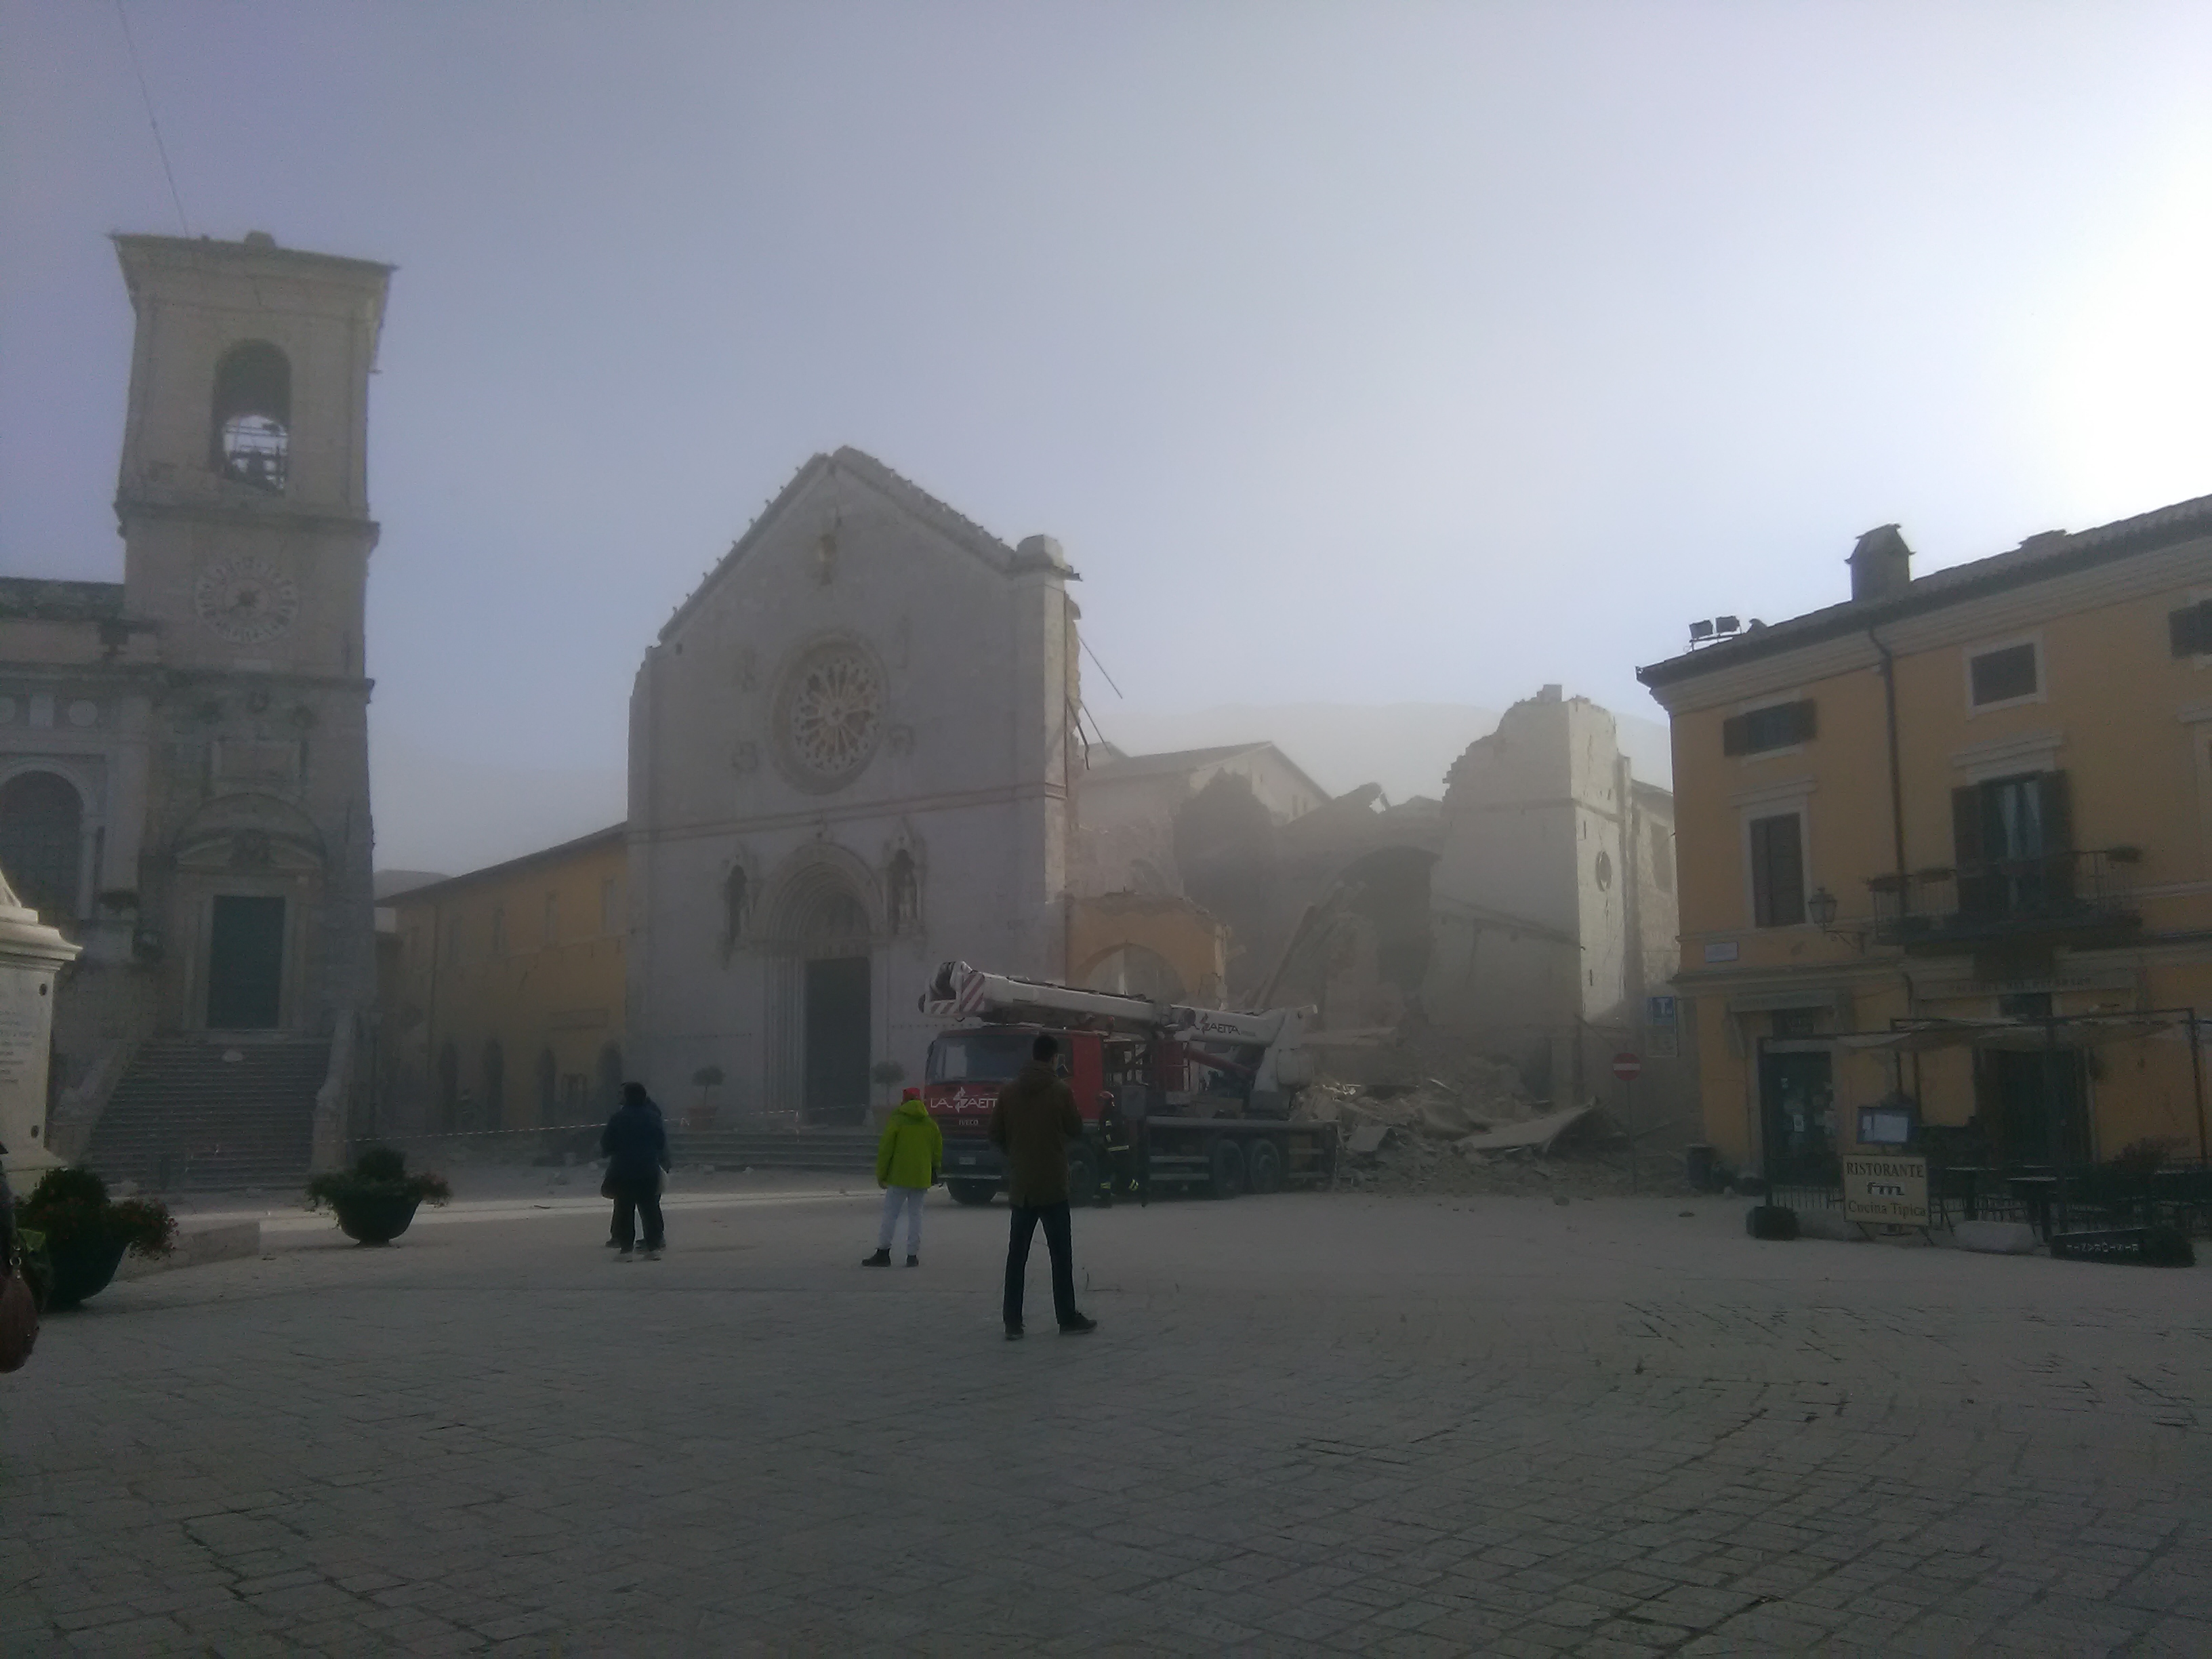 An earthquake destroys the Basilica of St. Benedict in Norcia, October 20, 2016.